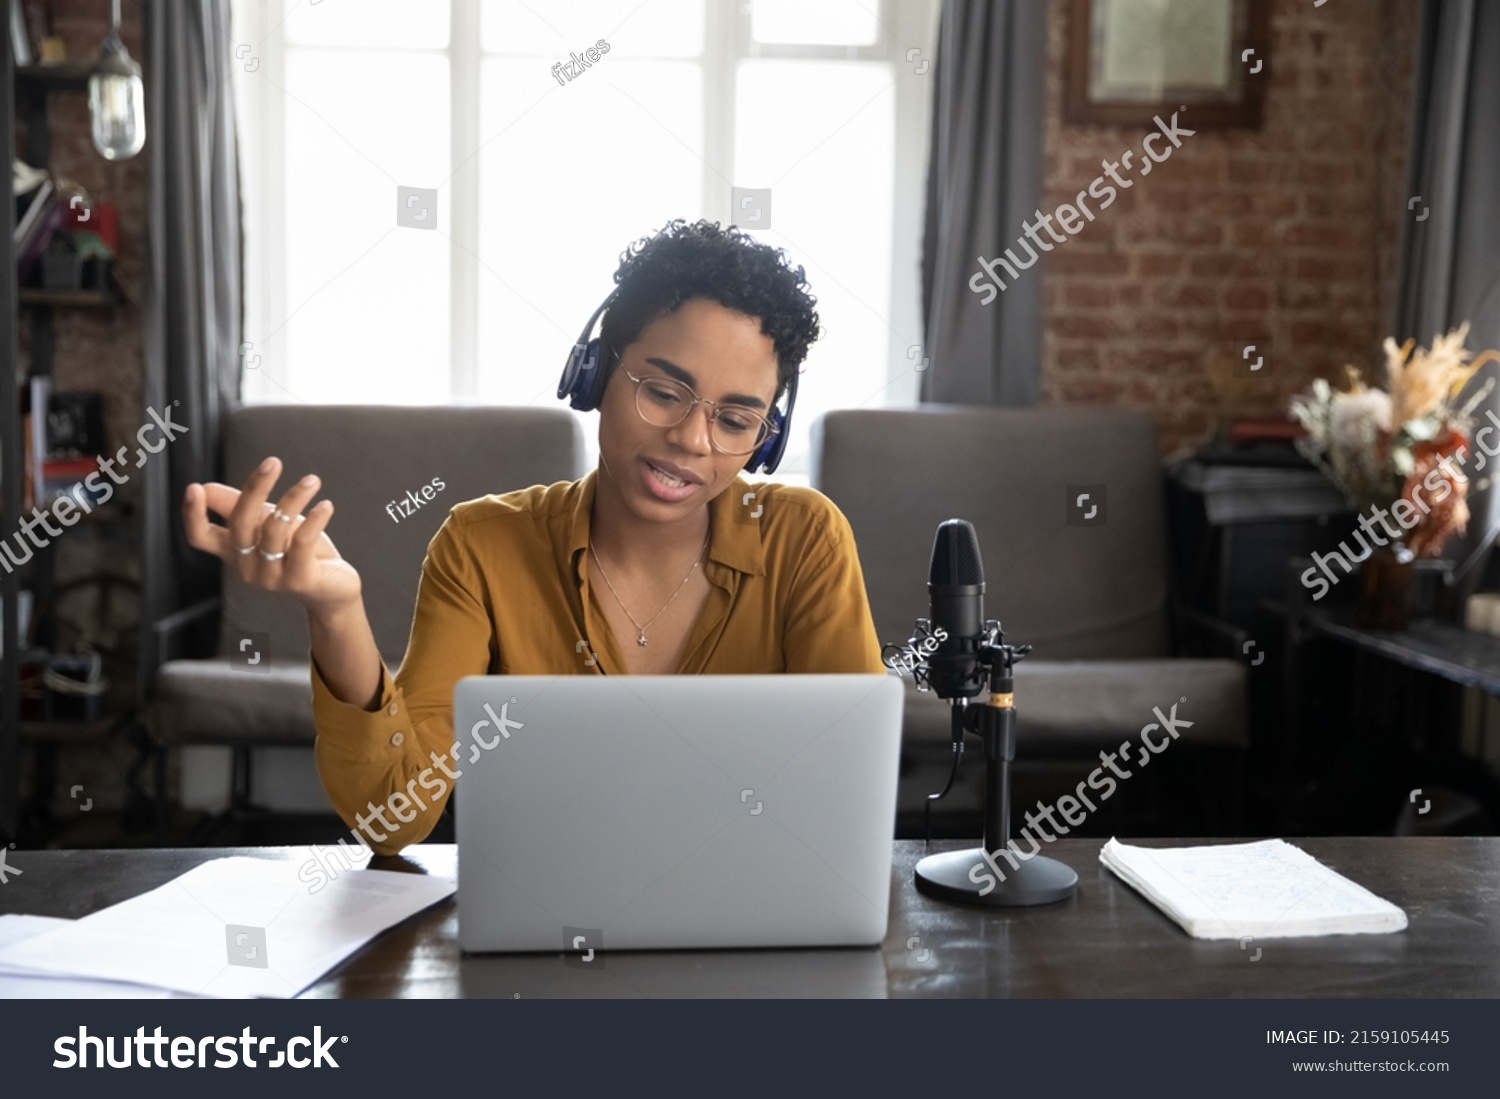 African woman wear wireless headphones sit at desk looks at laptop screen make speech talk into mike, records or lead live stream via internet in real time. Podcast, online radio program event concept #2159105445